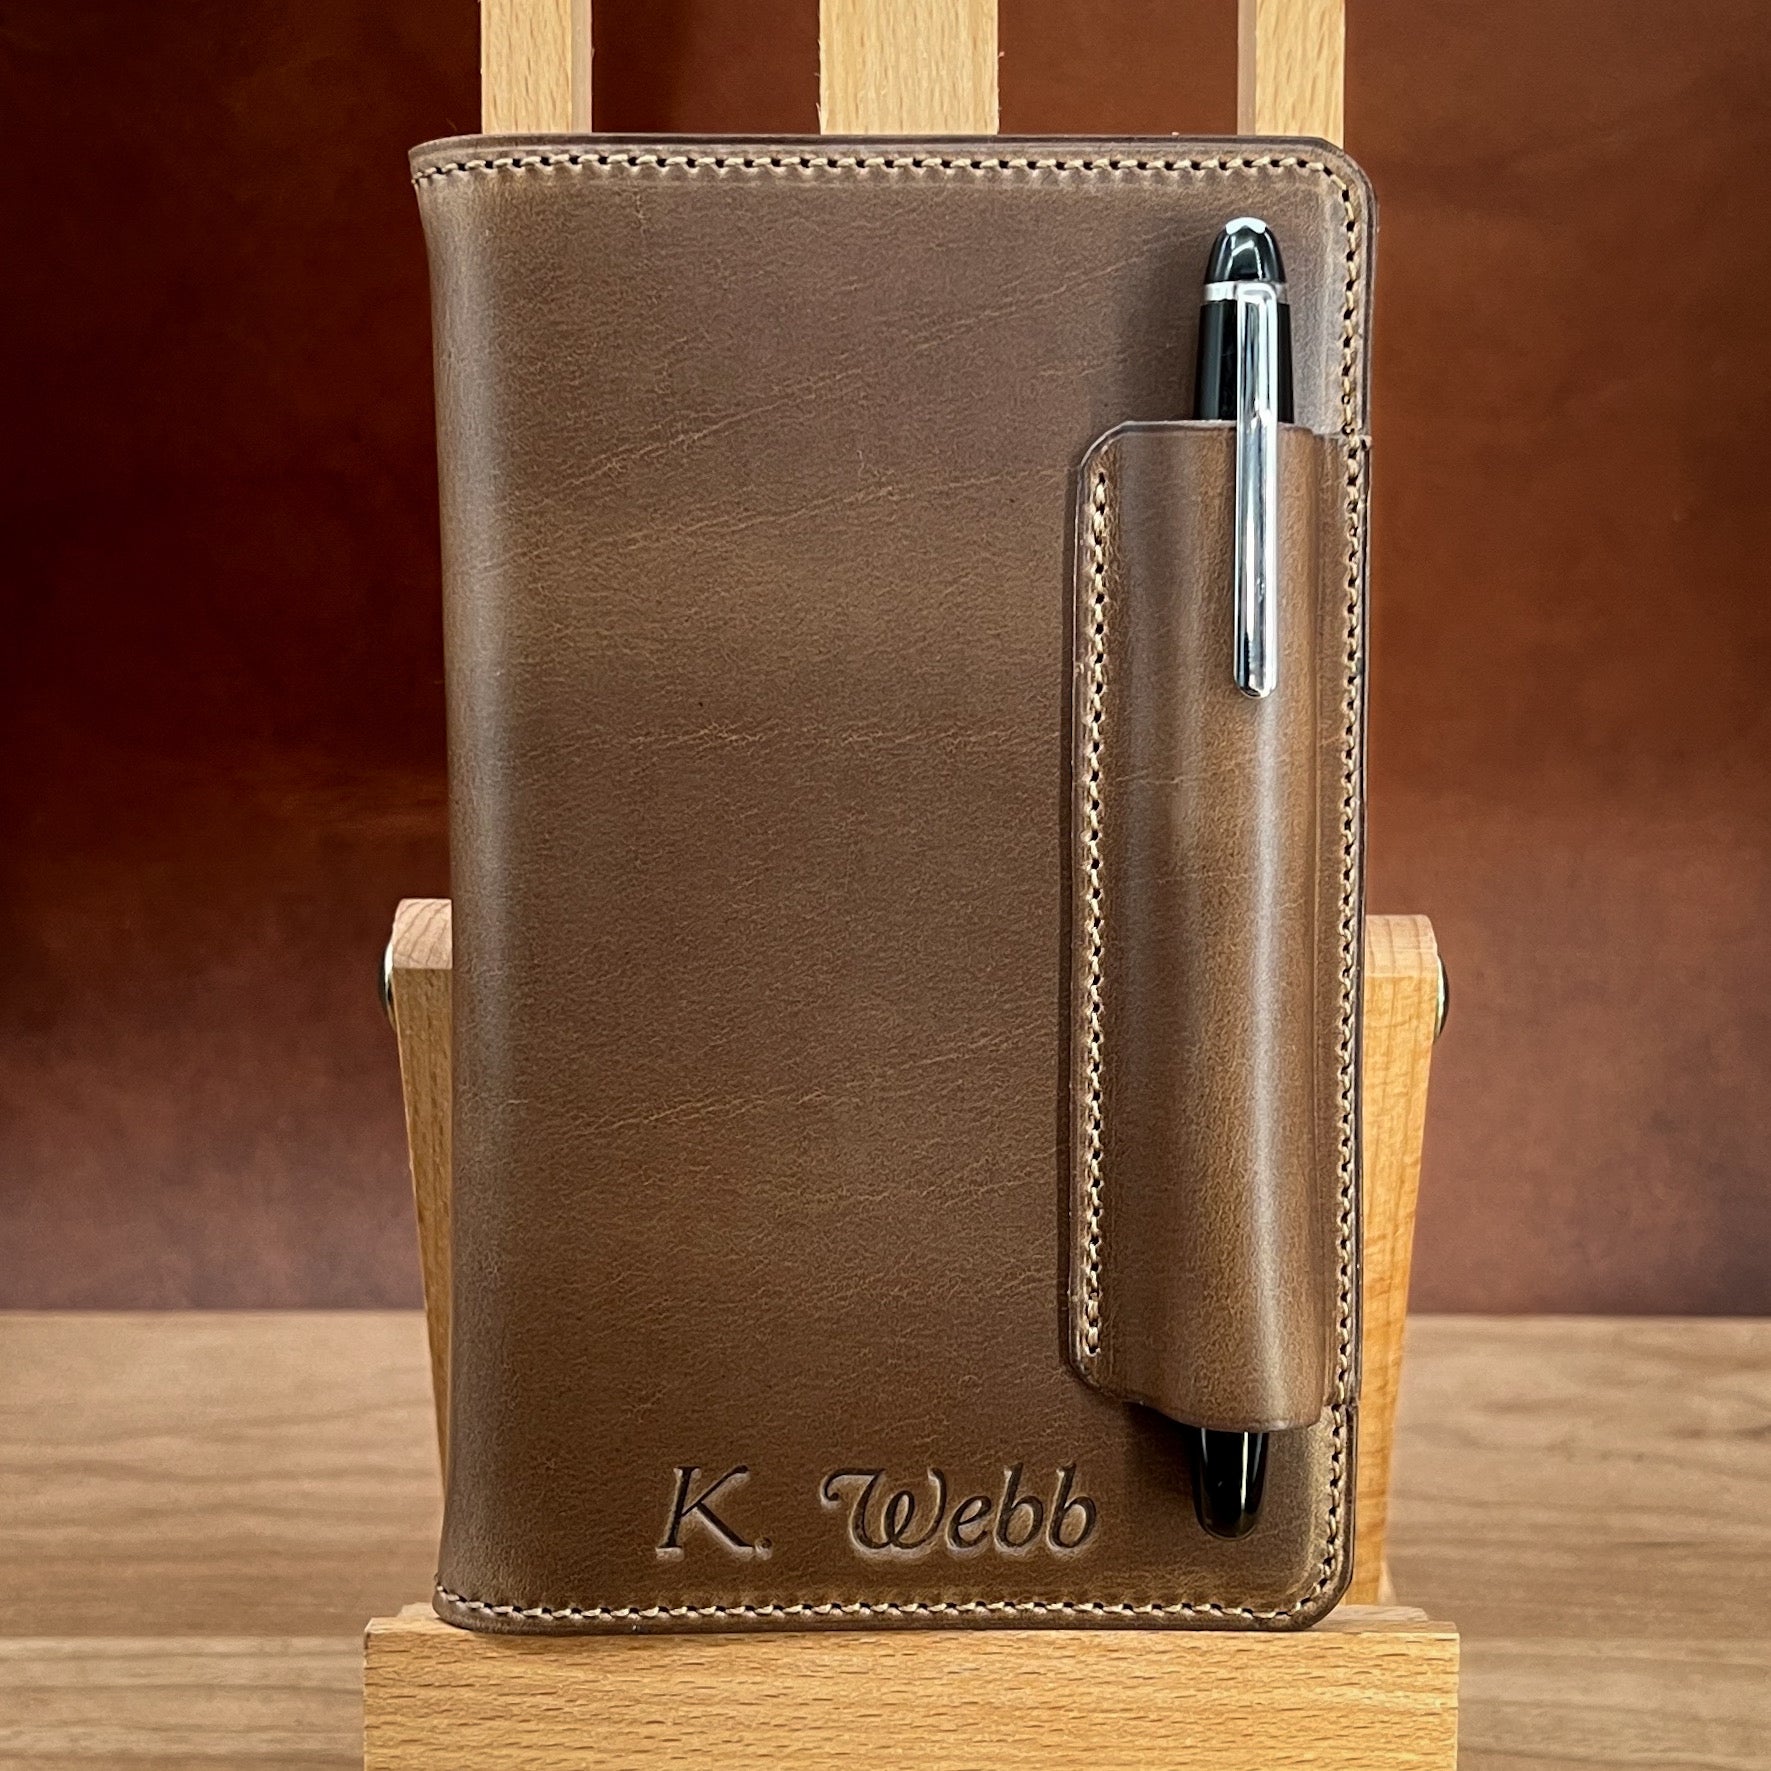 Horween Leather Notebook Cover with Pen Holder for Pocket Sized Notebooks including Field Notes.  Made with Natural CXL Horween leather and personalized with a heat stamped name. Handmade by Custom Leather and Pen